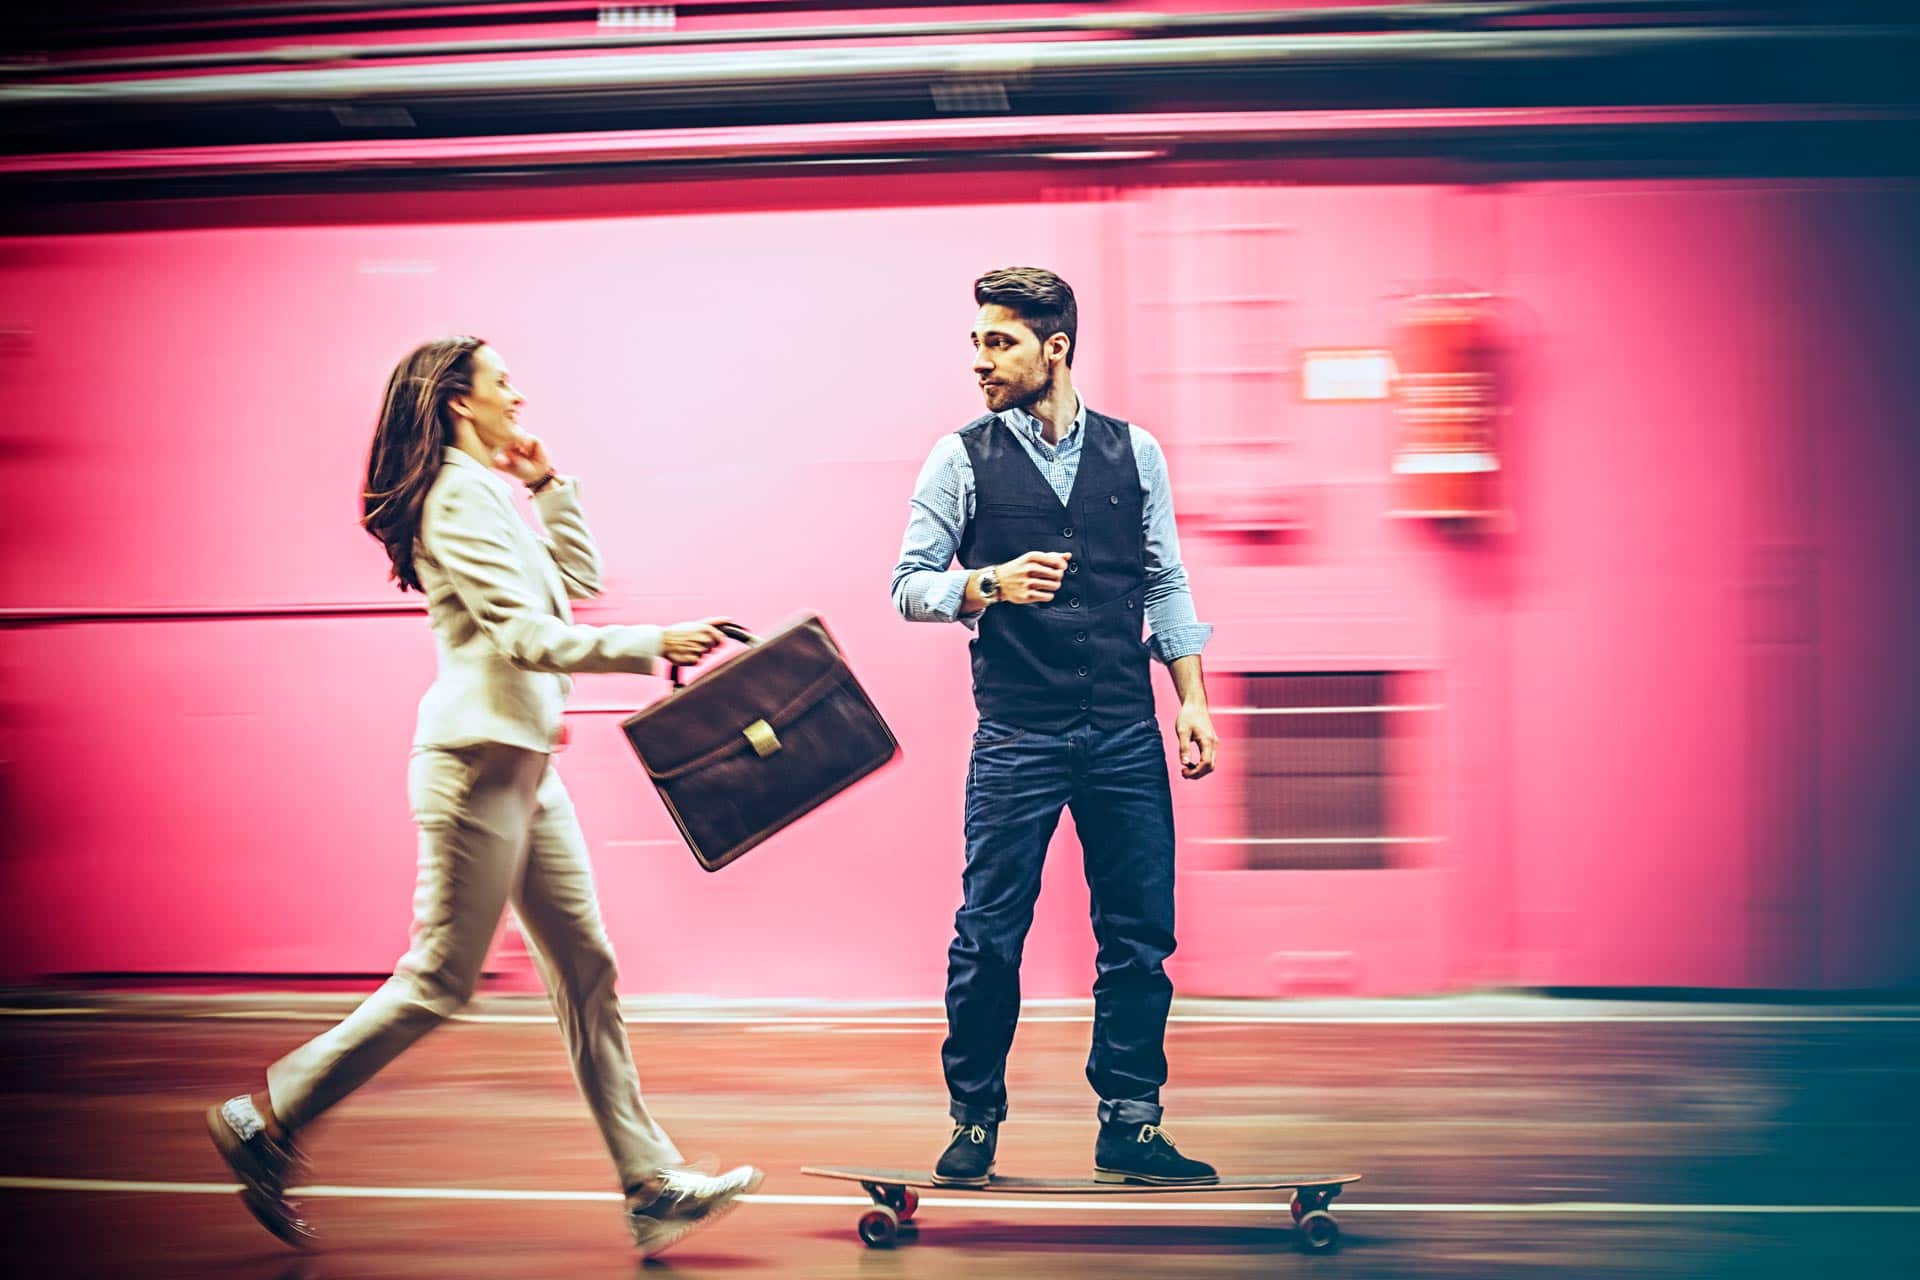 A well dressed man on a skateboard passing a woman who is hurrying with a briefcase and is on the phone